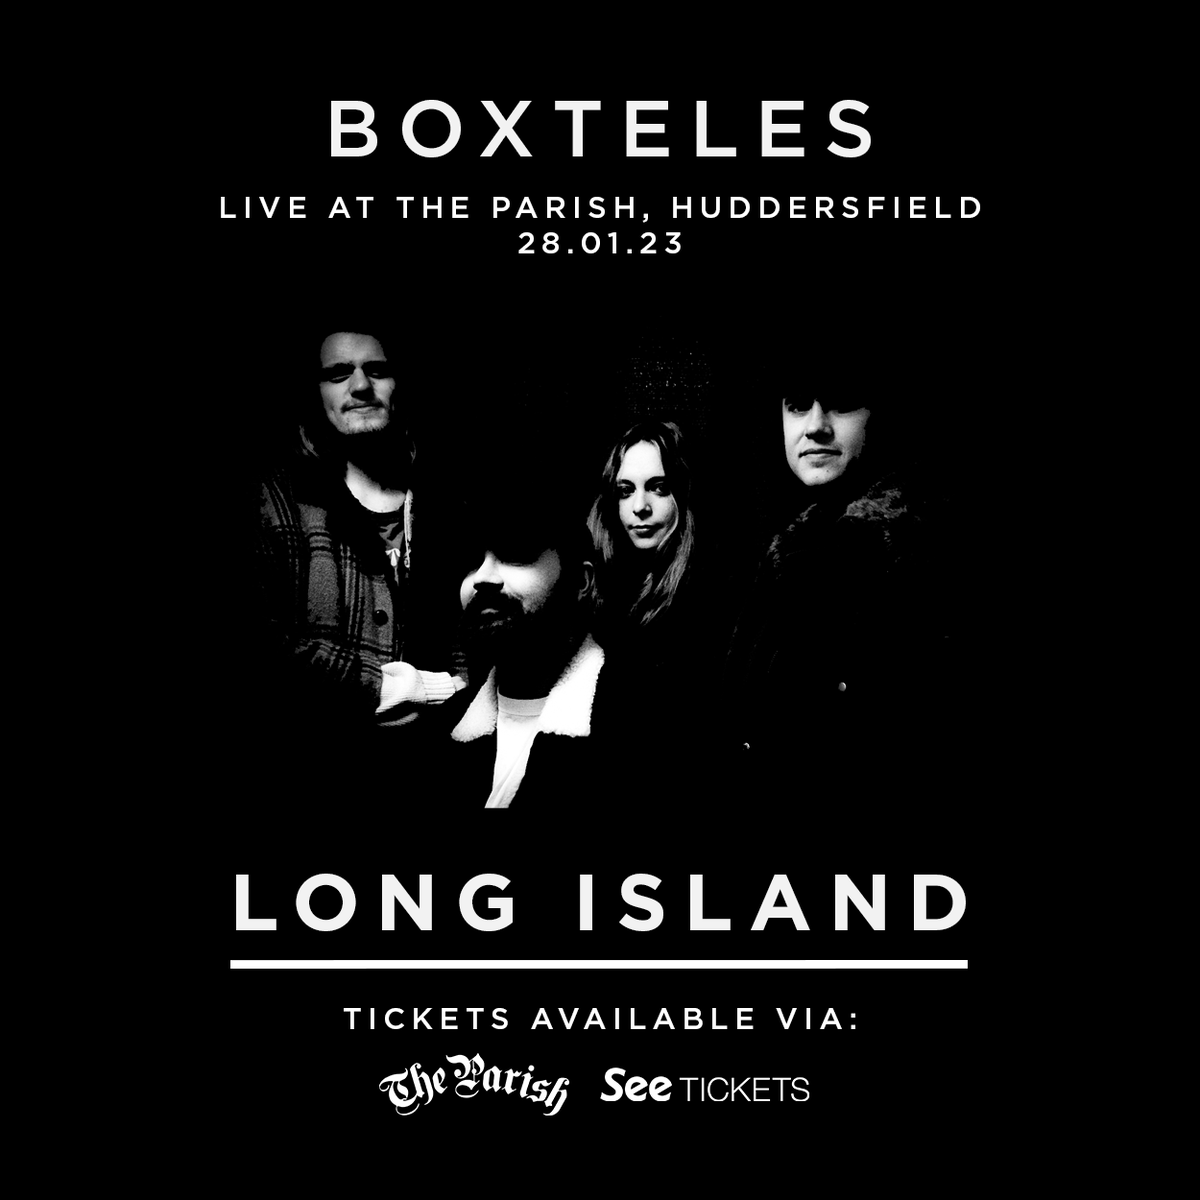 we'll be back for our second hometown show this month, supporting the boys in @boxteles at @ParishHudd 

grab yourself some tickets: parishpub.co.uk/gigs/326/